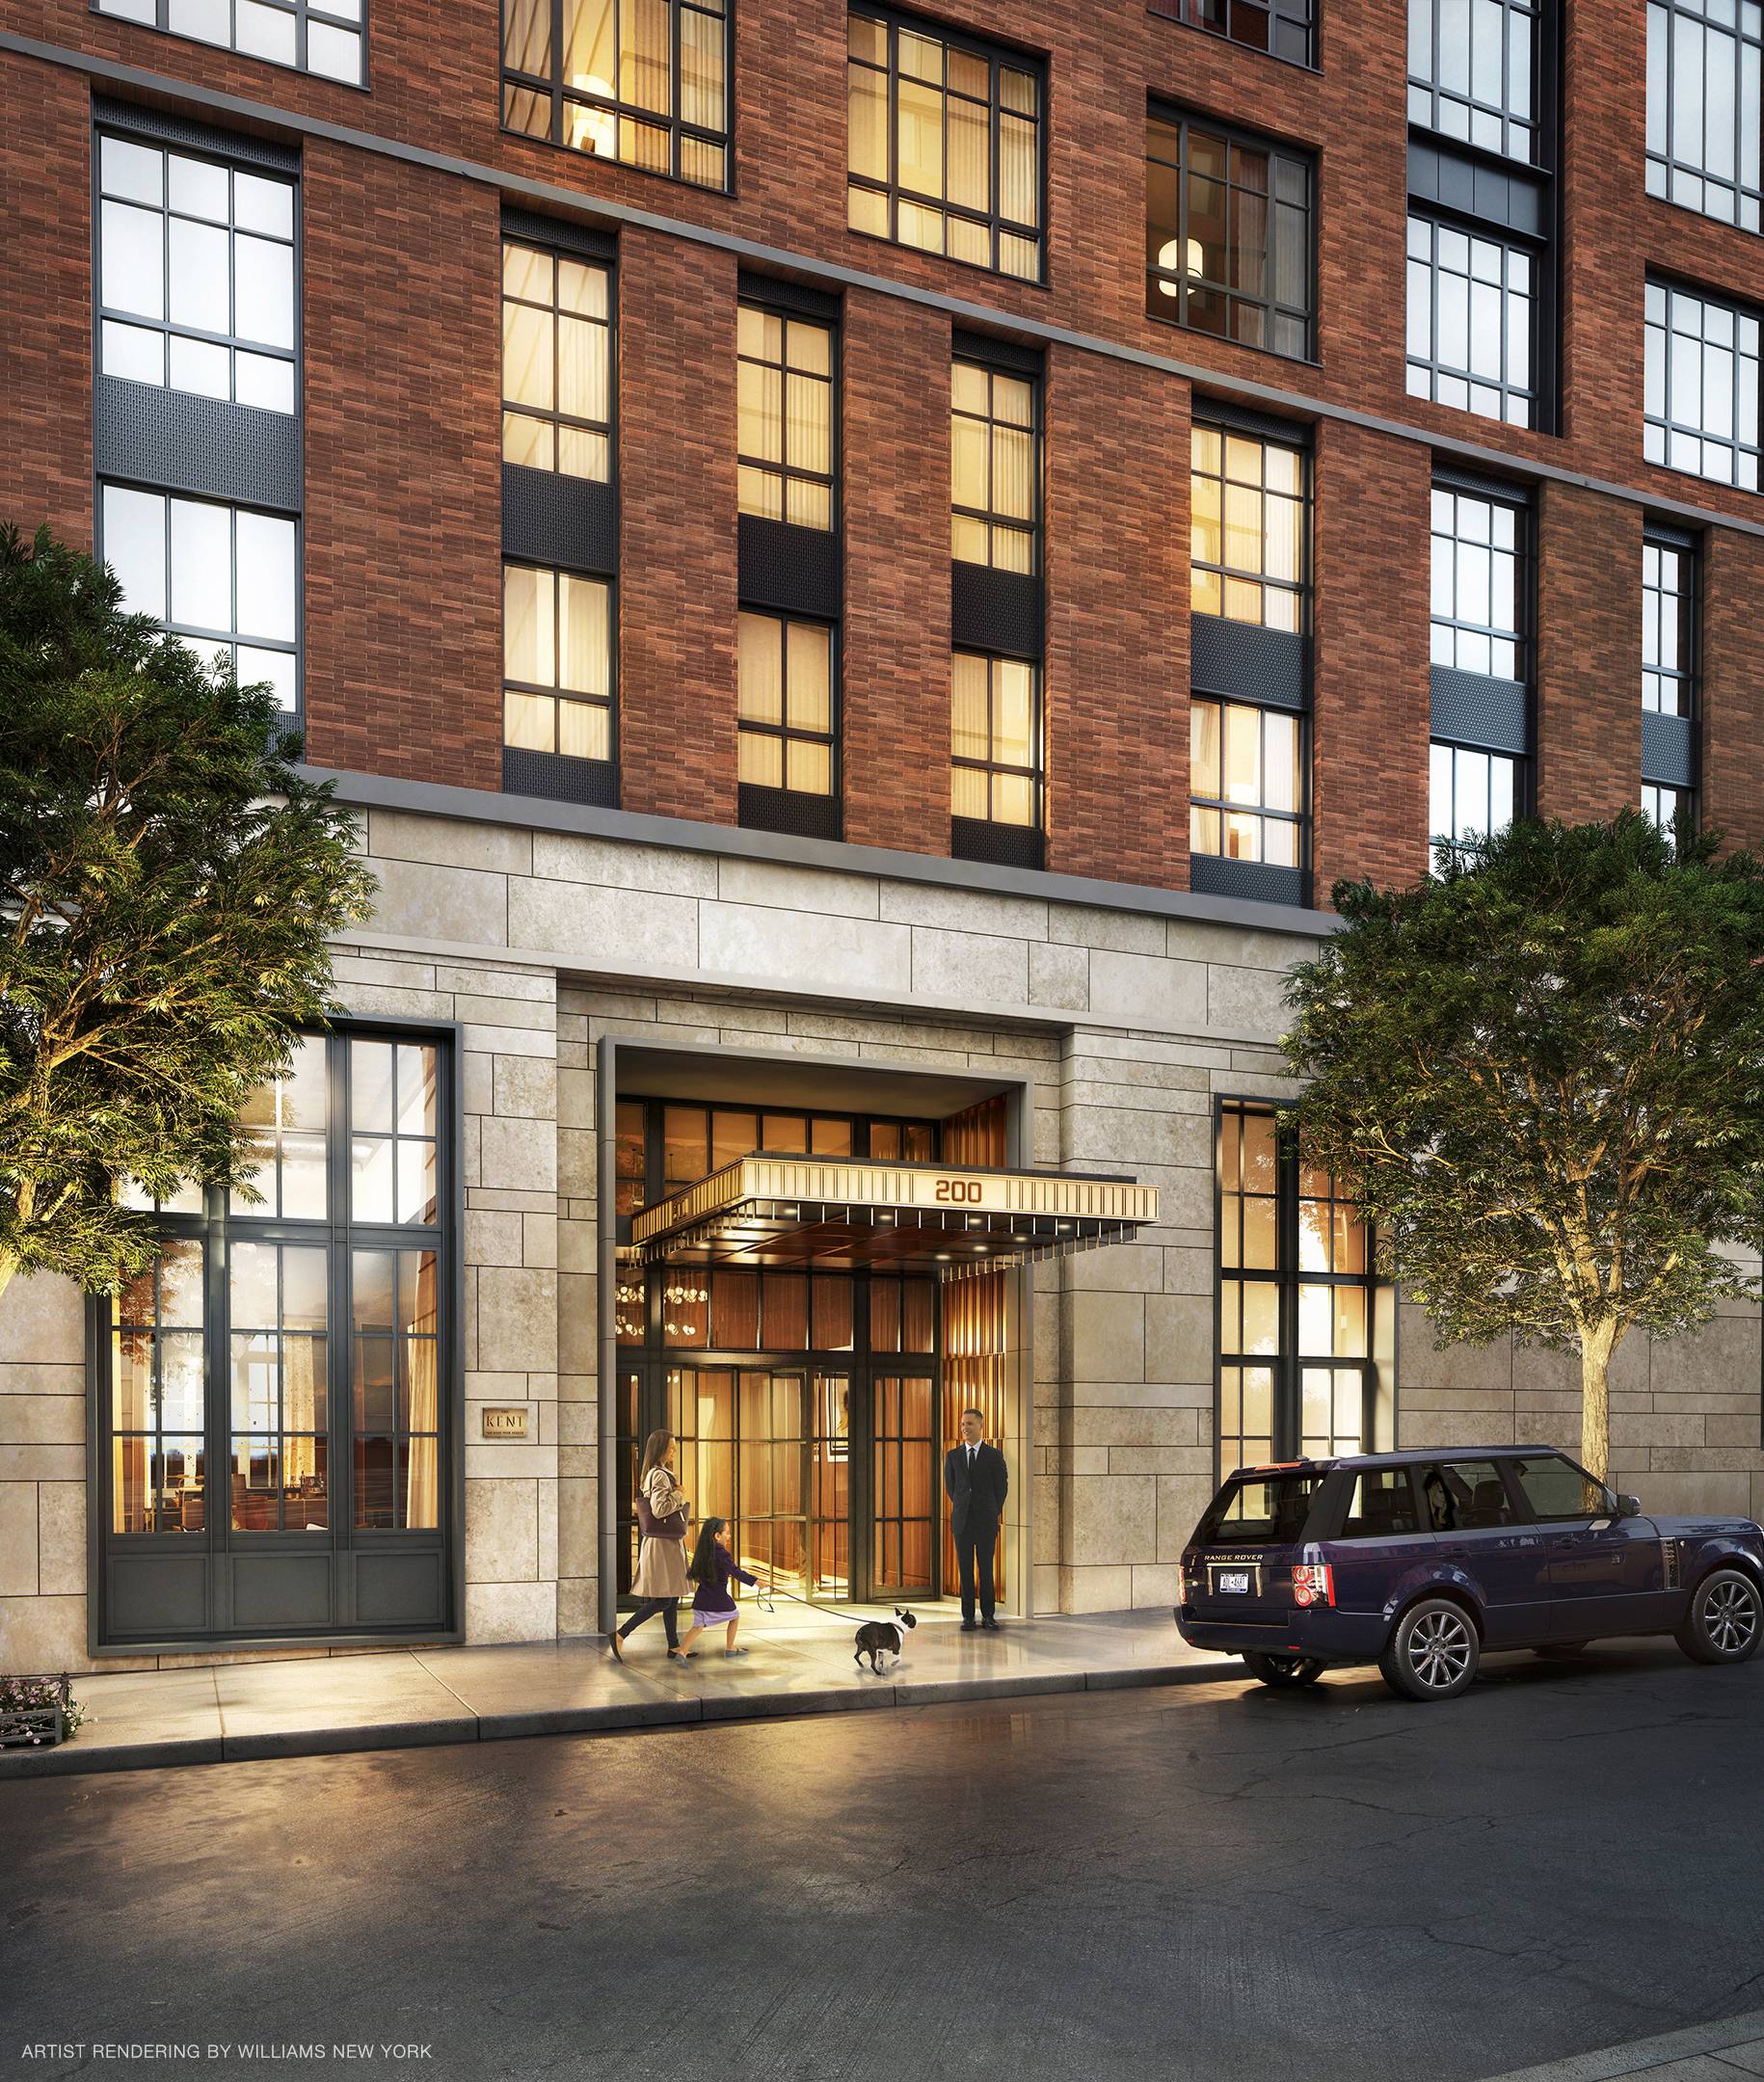 Extell Development Company is proud to present The Kent, a tailored collection of elegantly appointed condominium residences on the Upper East Side, crafted by award winning architects Beyer Blinder Belle ...